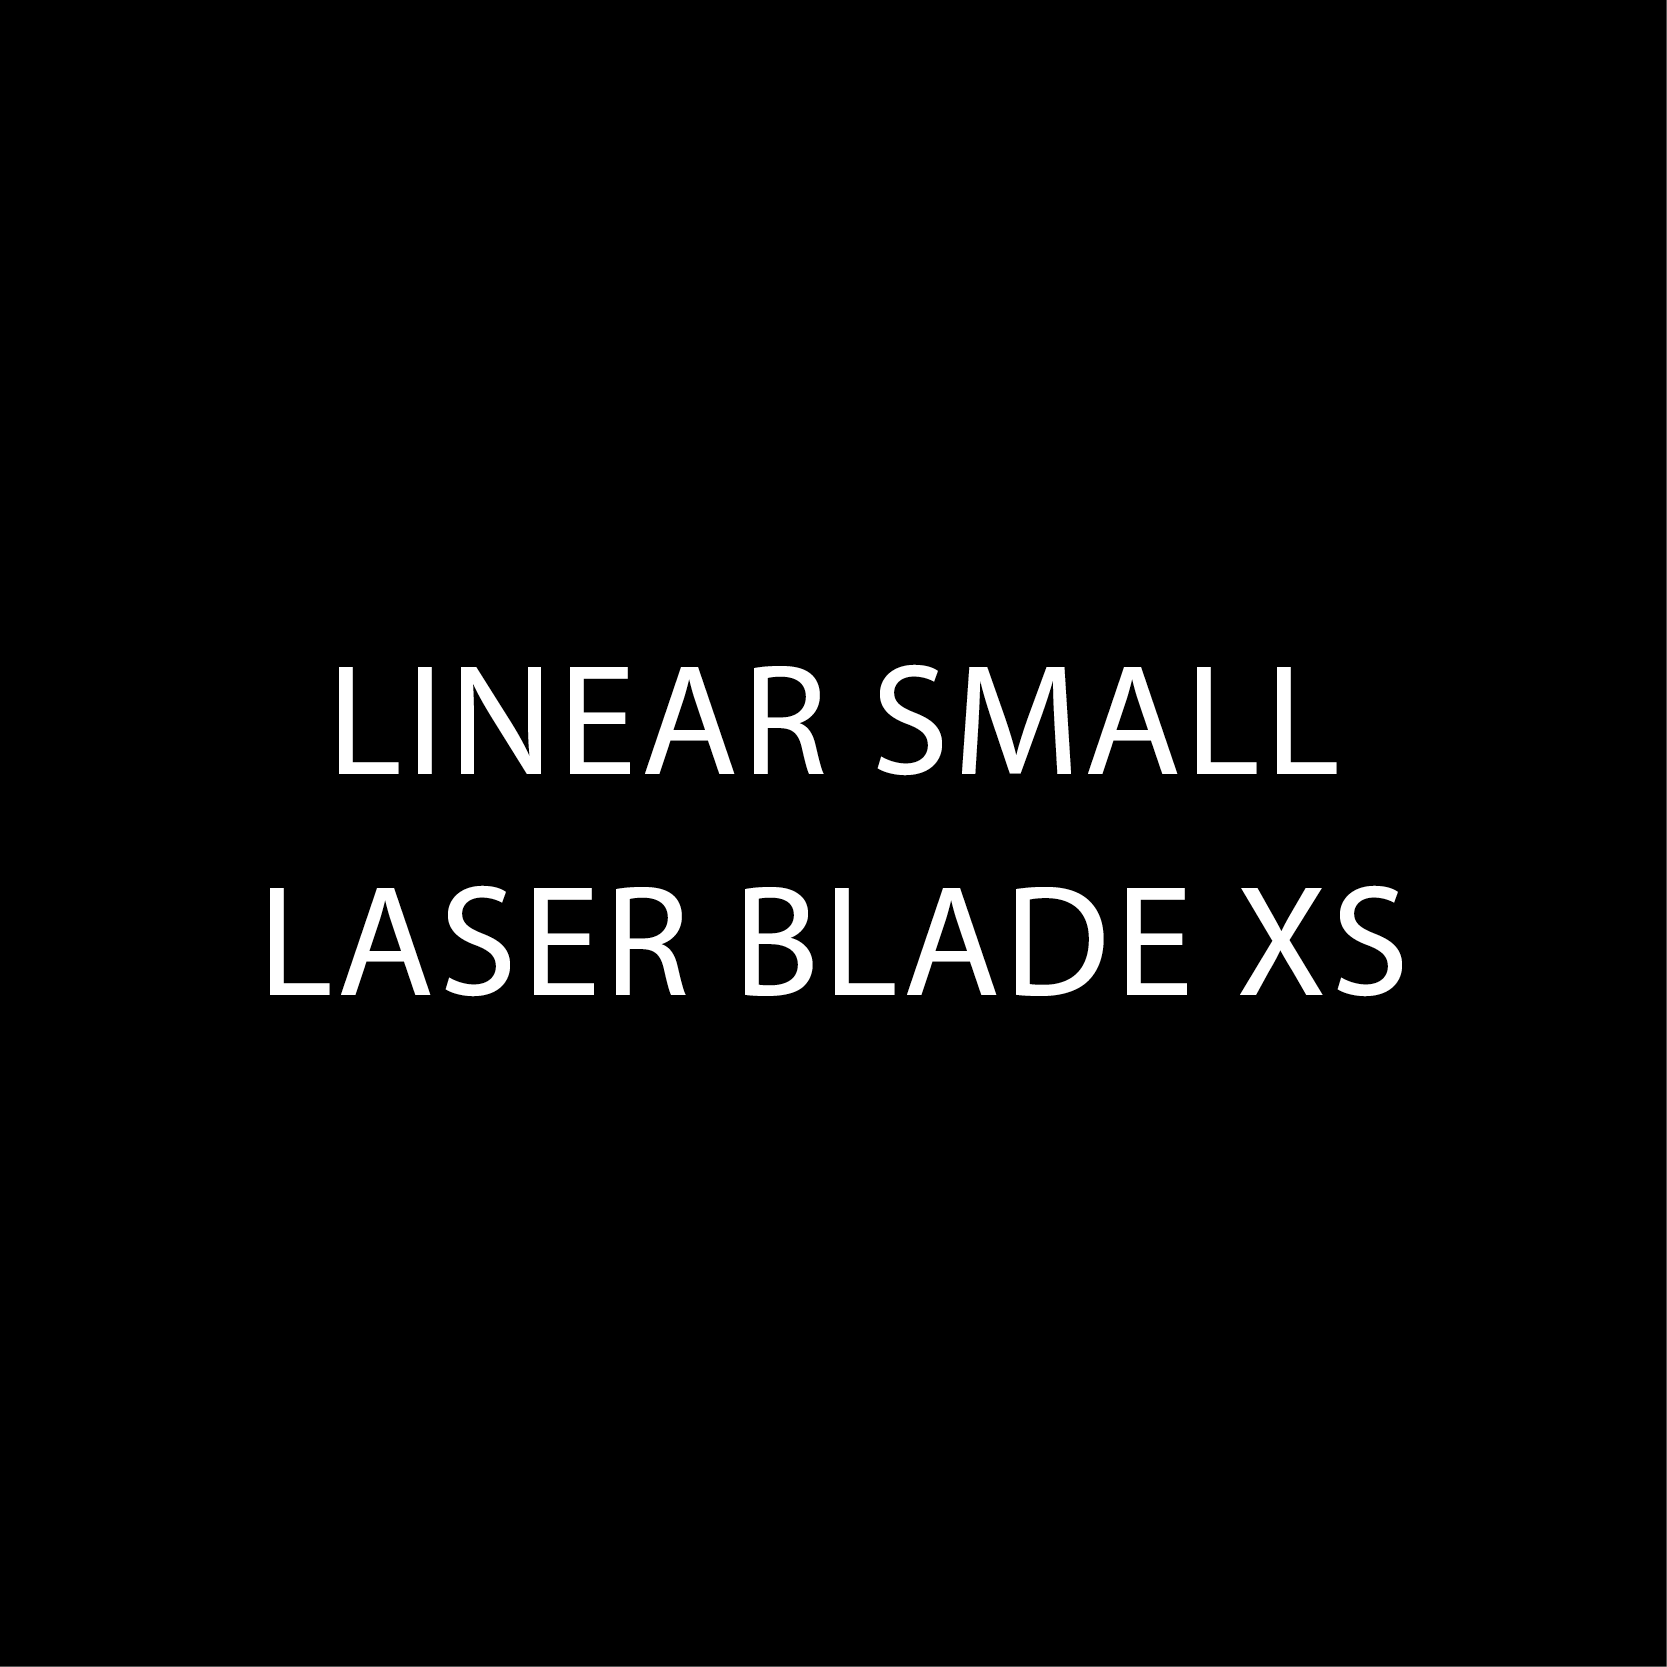 LINER SMALL LASER BLADE XS 2.png